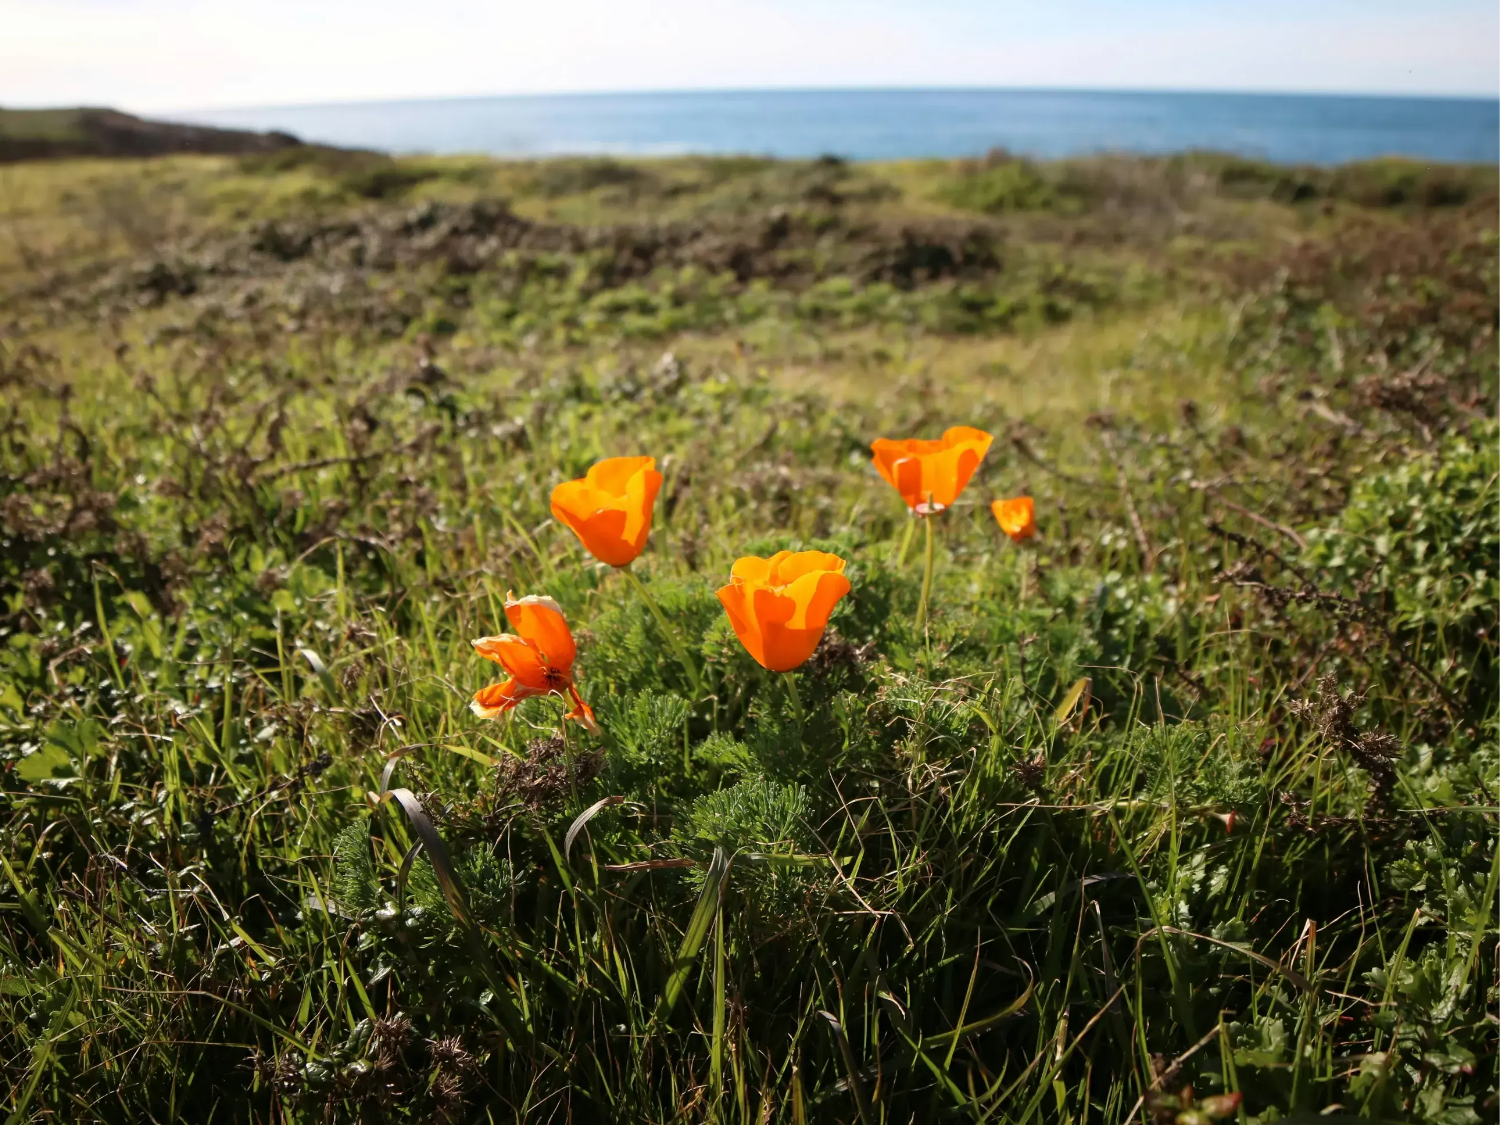 A few blooming poppies amidst a green field